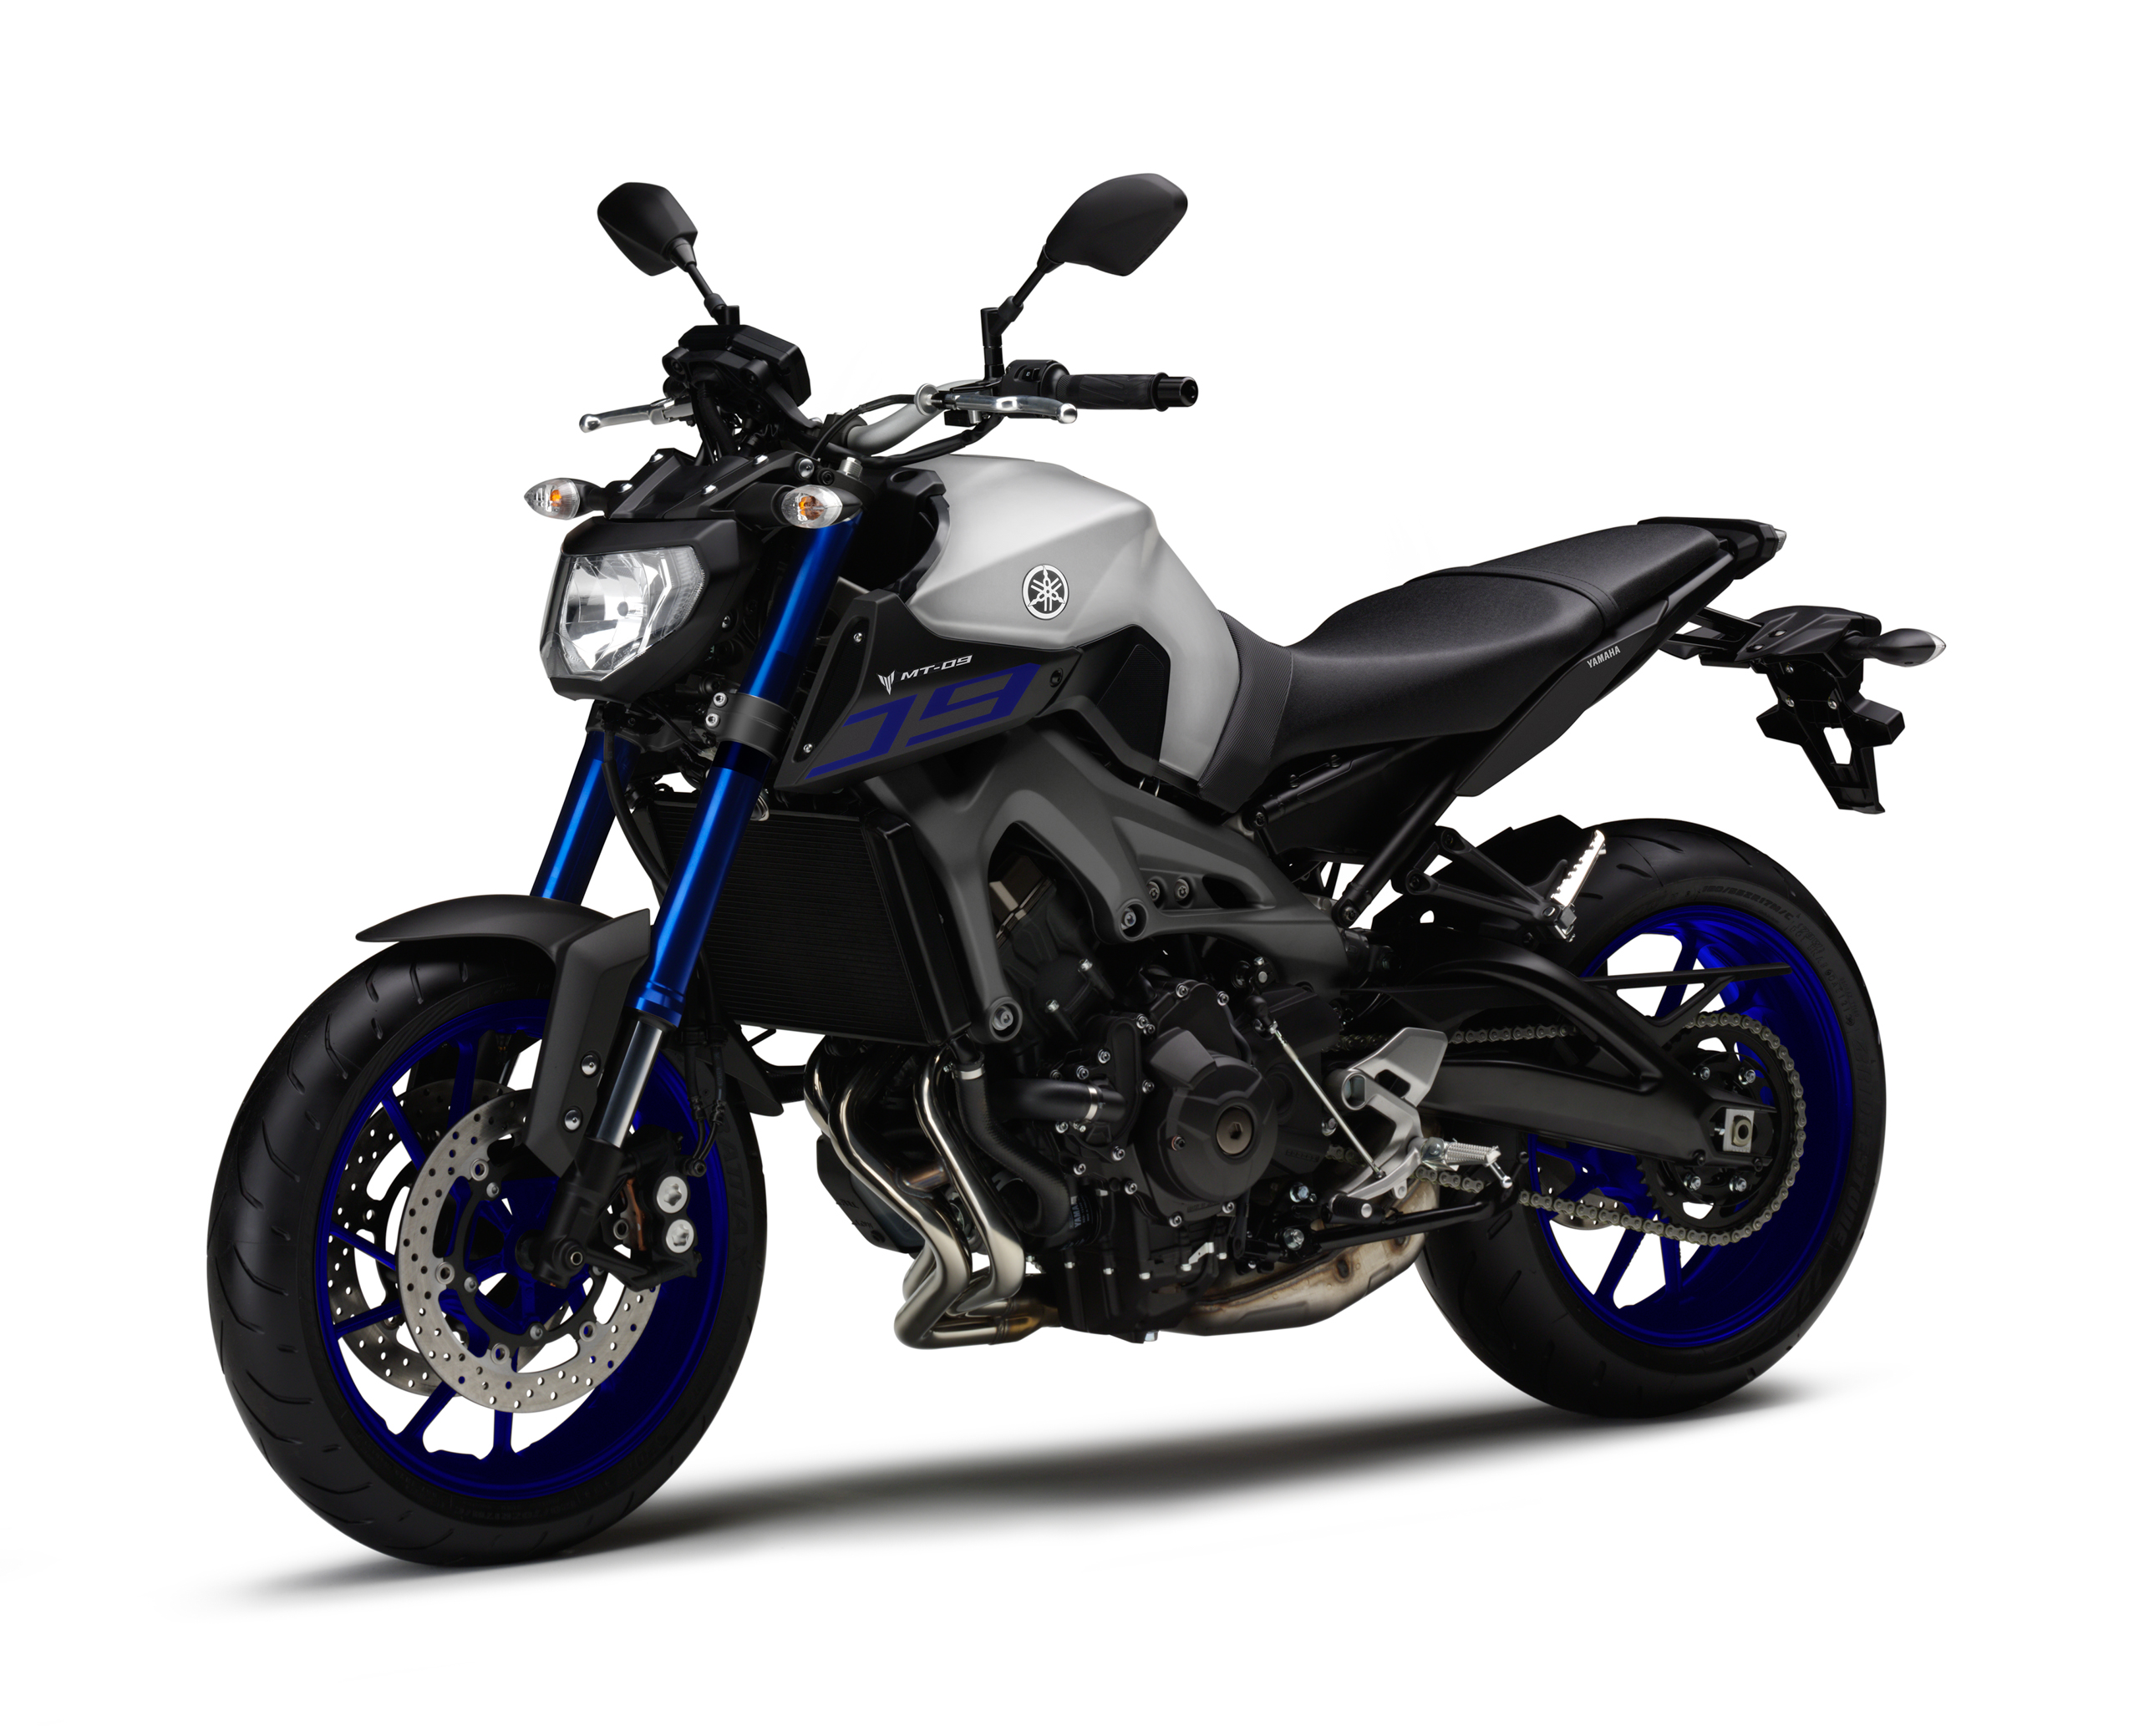 2016 Yamaha MT-09 in Malaysia - new colours, RM45k Image 448723